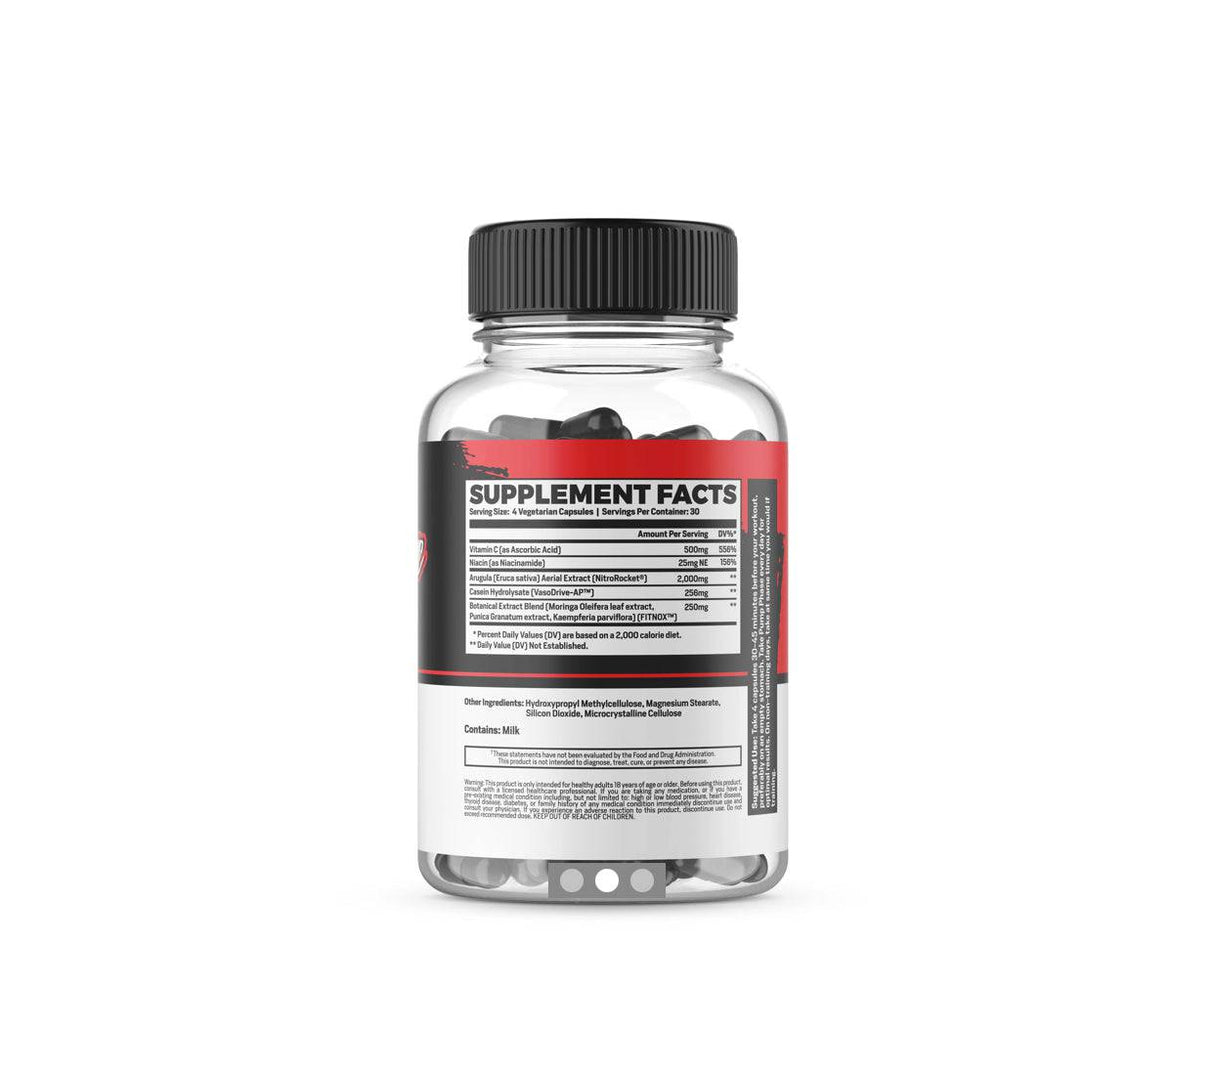 Pump Phase Extreme - Phase 1 Nutrition - Prime Sports Nutrition